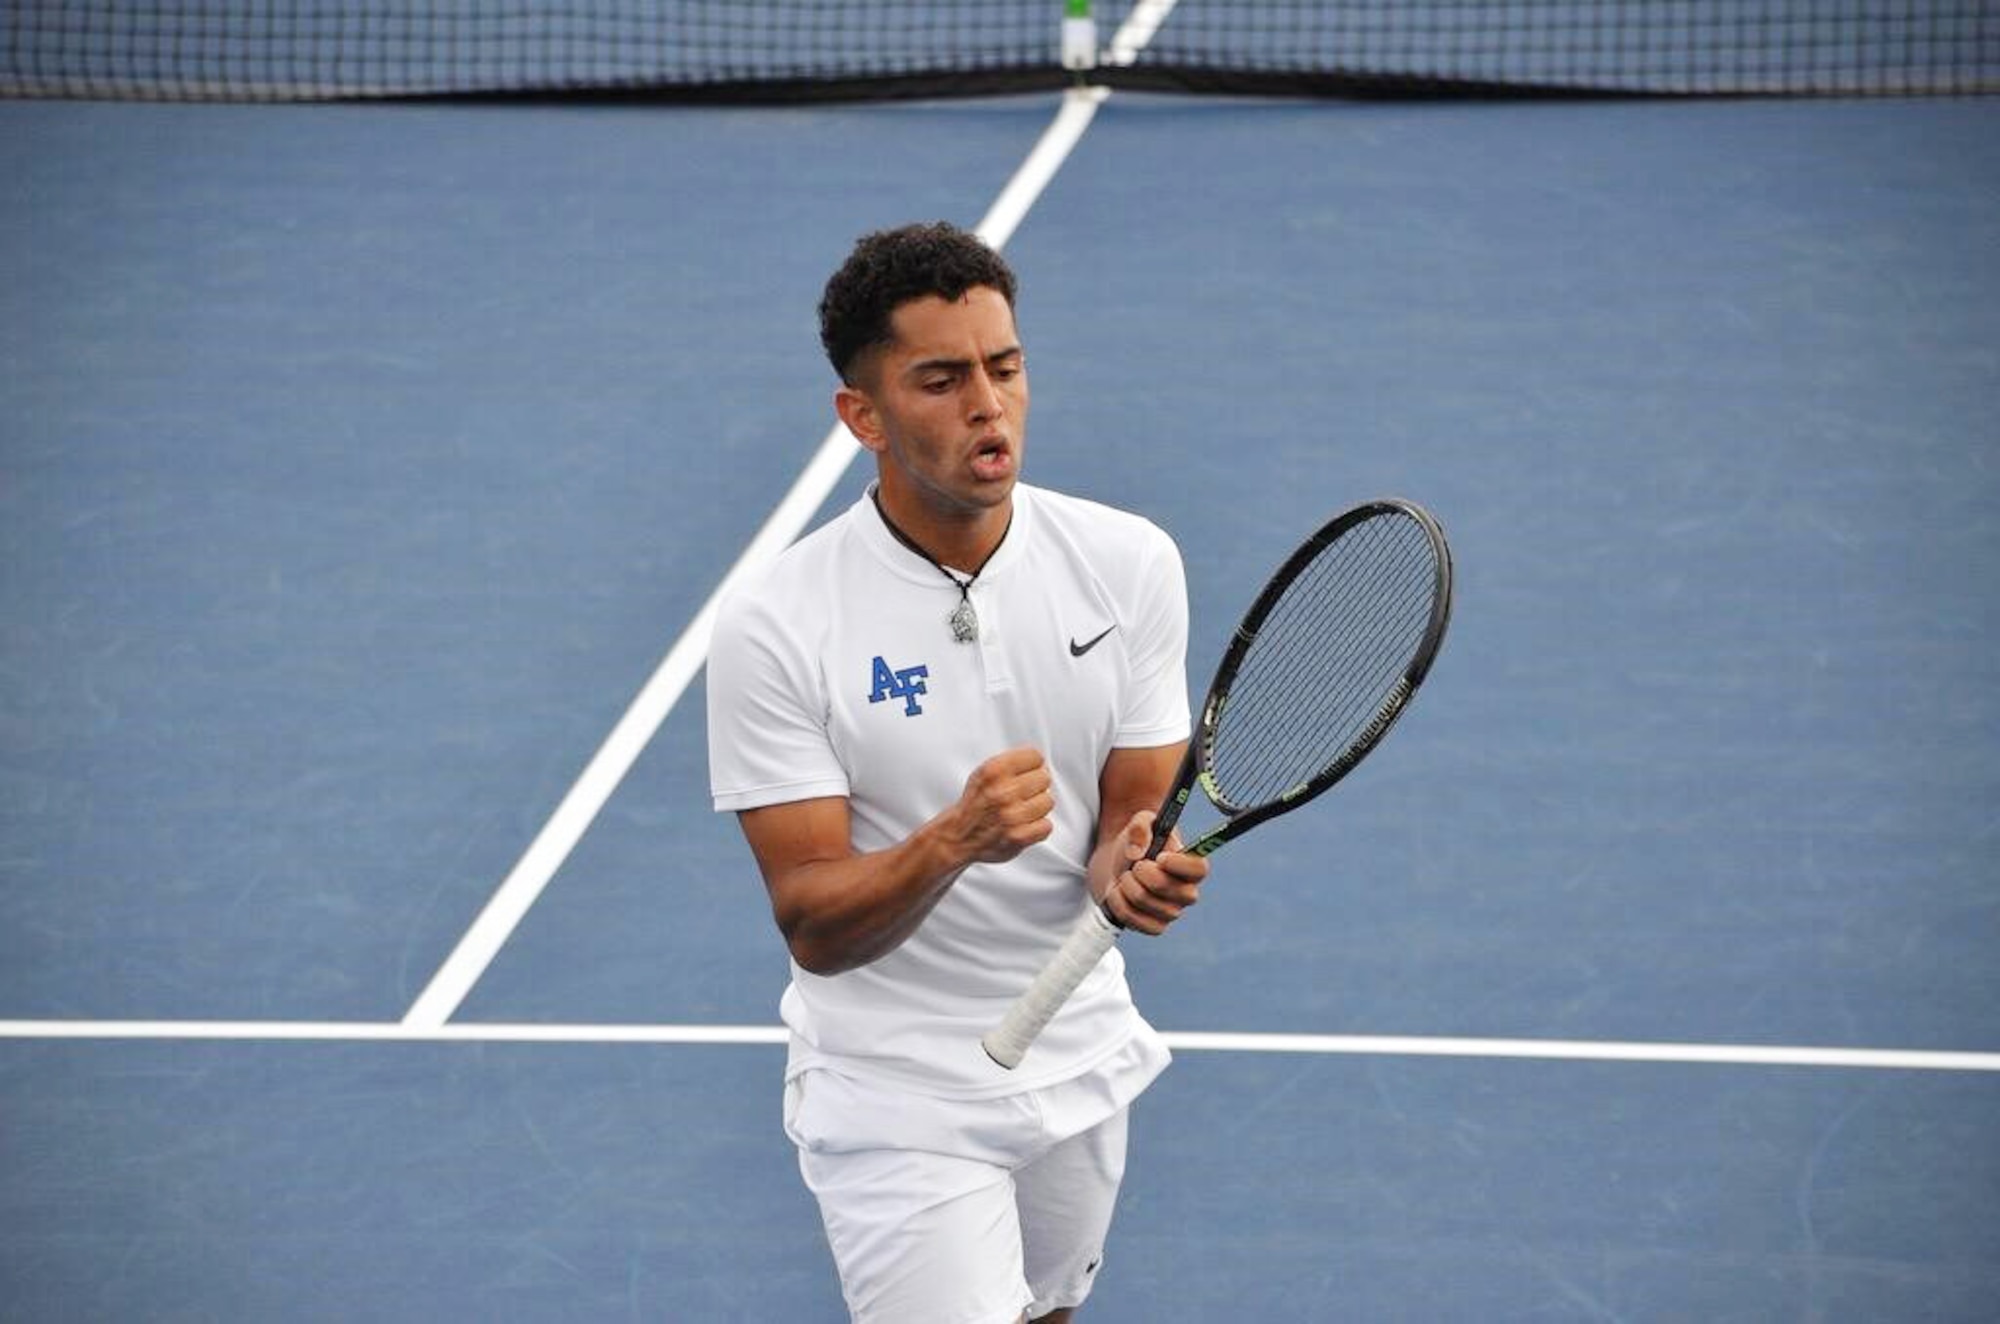 U.S. Air Force 2nd Lt. Isaac Perez celebrates the end of a match in this undated photo while a member of the United States Air Force Academy men’s tennis team. Perez, who will begin pilot training in early 2020, has been named a 2019 recipient of the Intercollegiate Tennis Association’s national Arthur Ashe Jr. Leadership and Sportsmanship award. (U.S. Air Force courtesy photo)